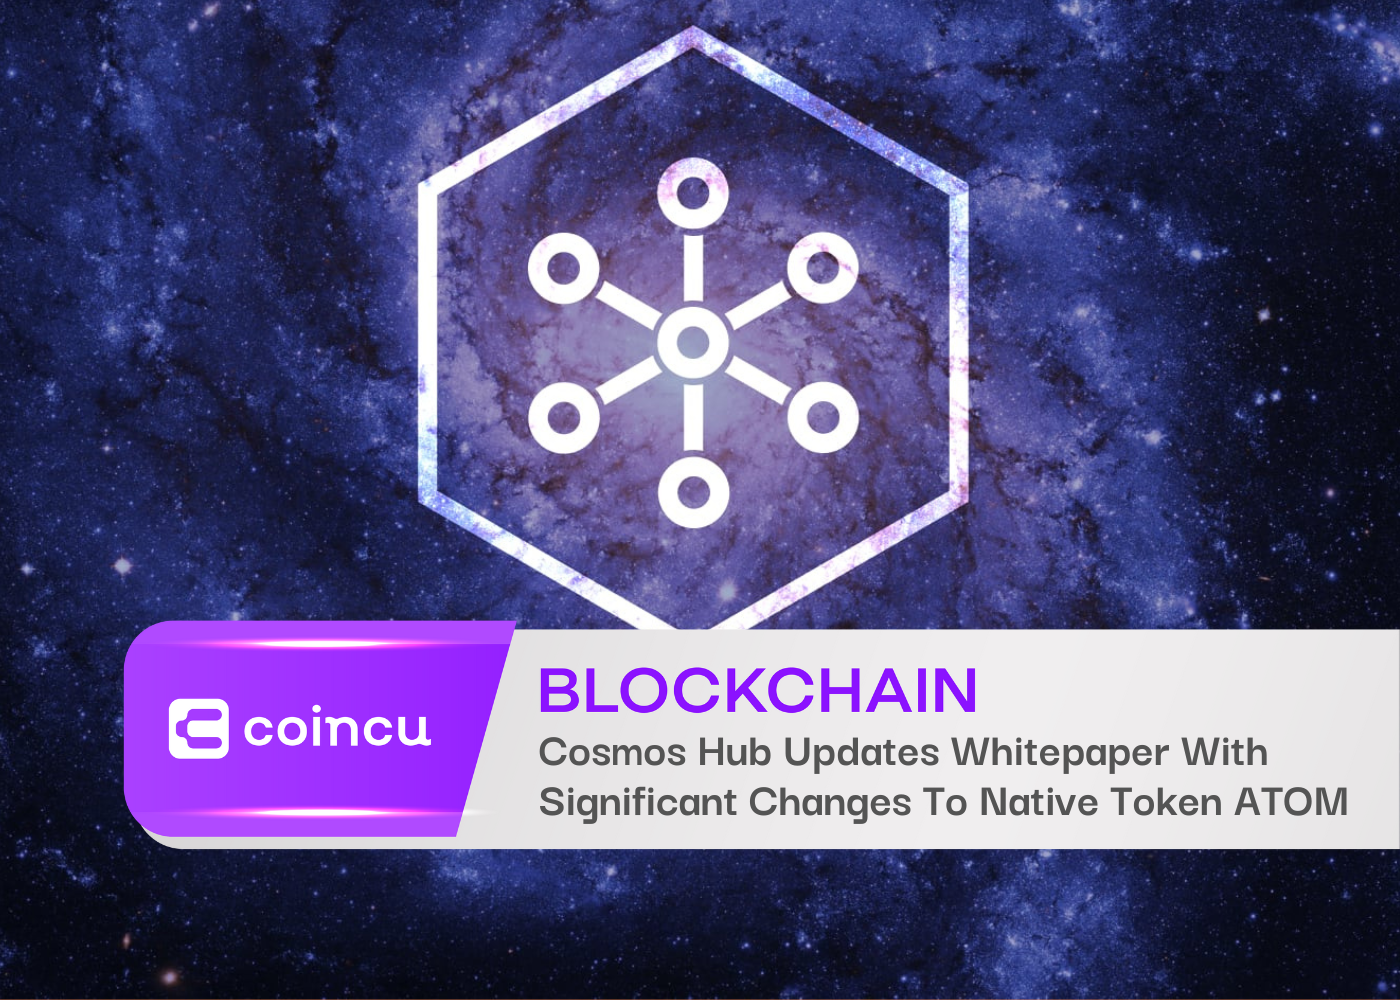 Cosmos Hub Updates Whitepaper With Significant